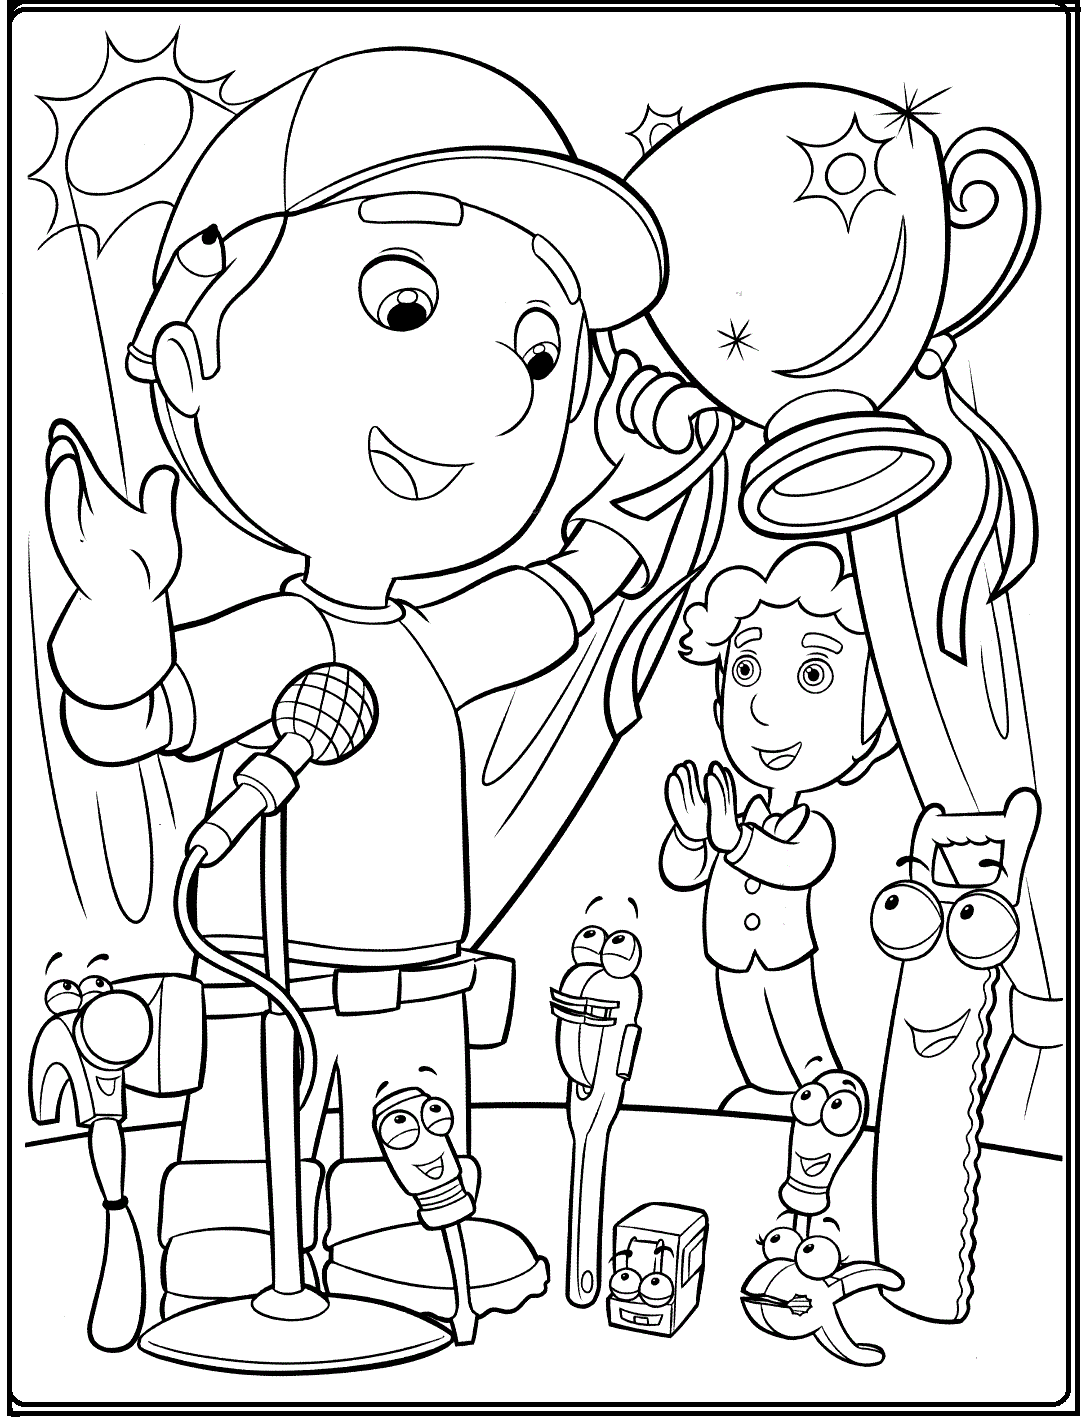 manny-concert-coloring-books